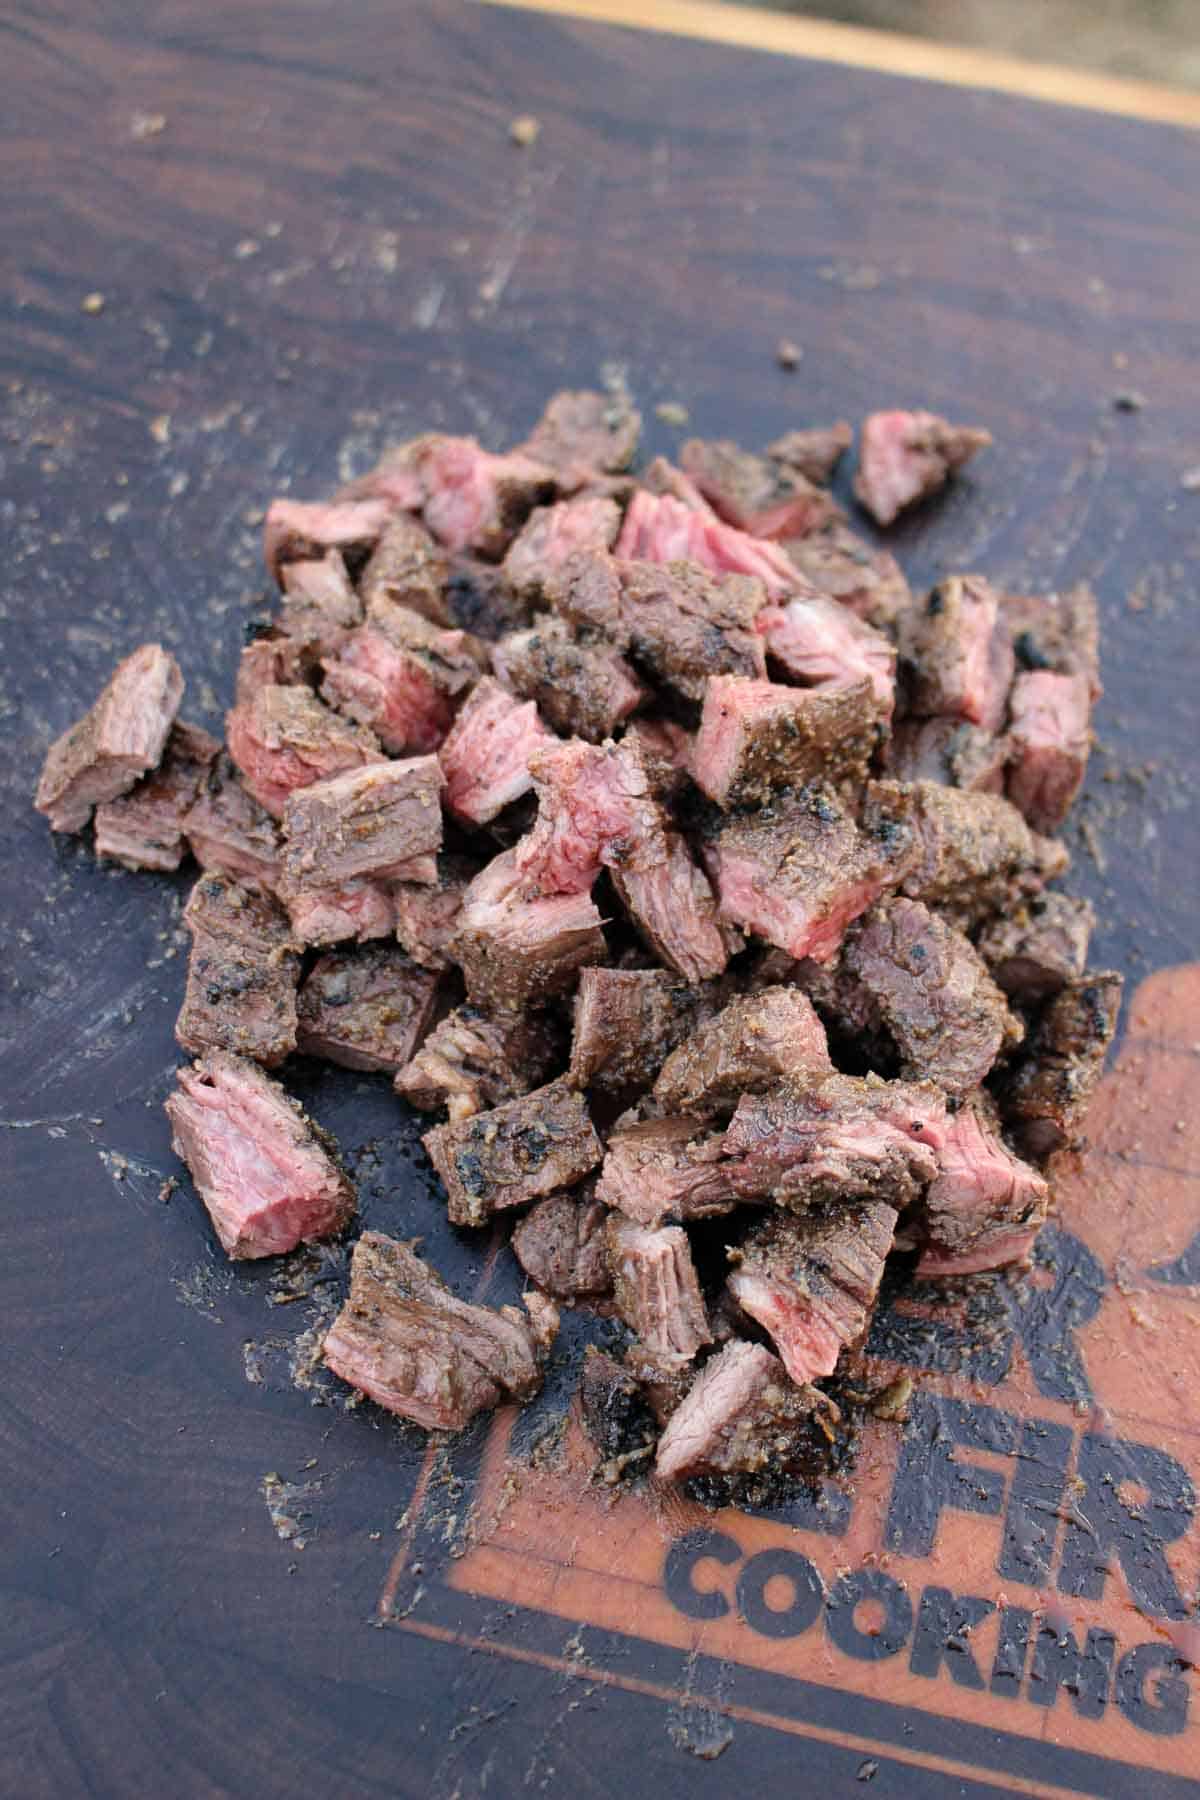 The tender skirt steak is chopped into tasty cubes.  